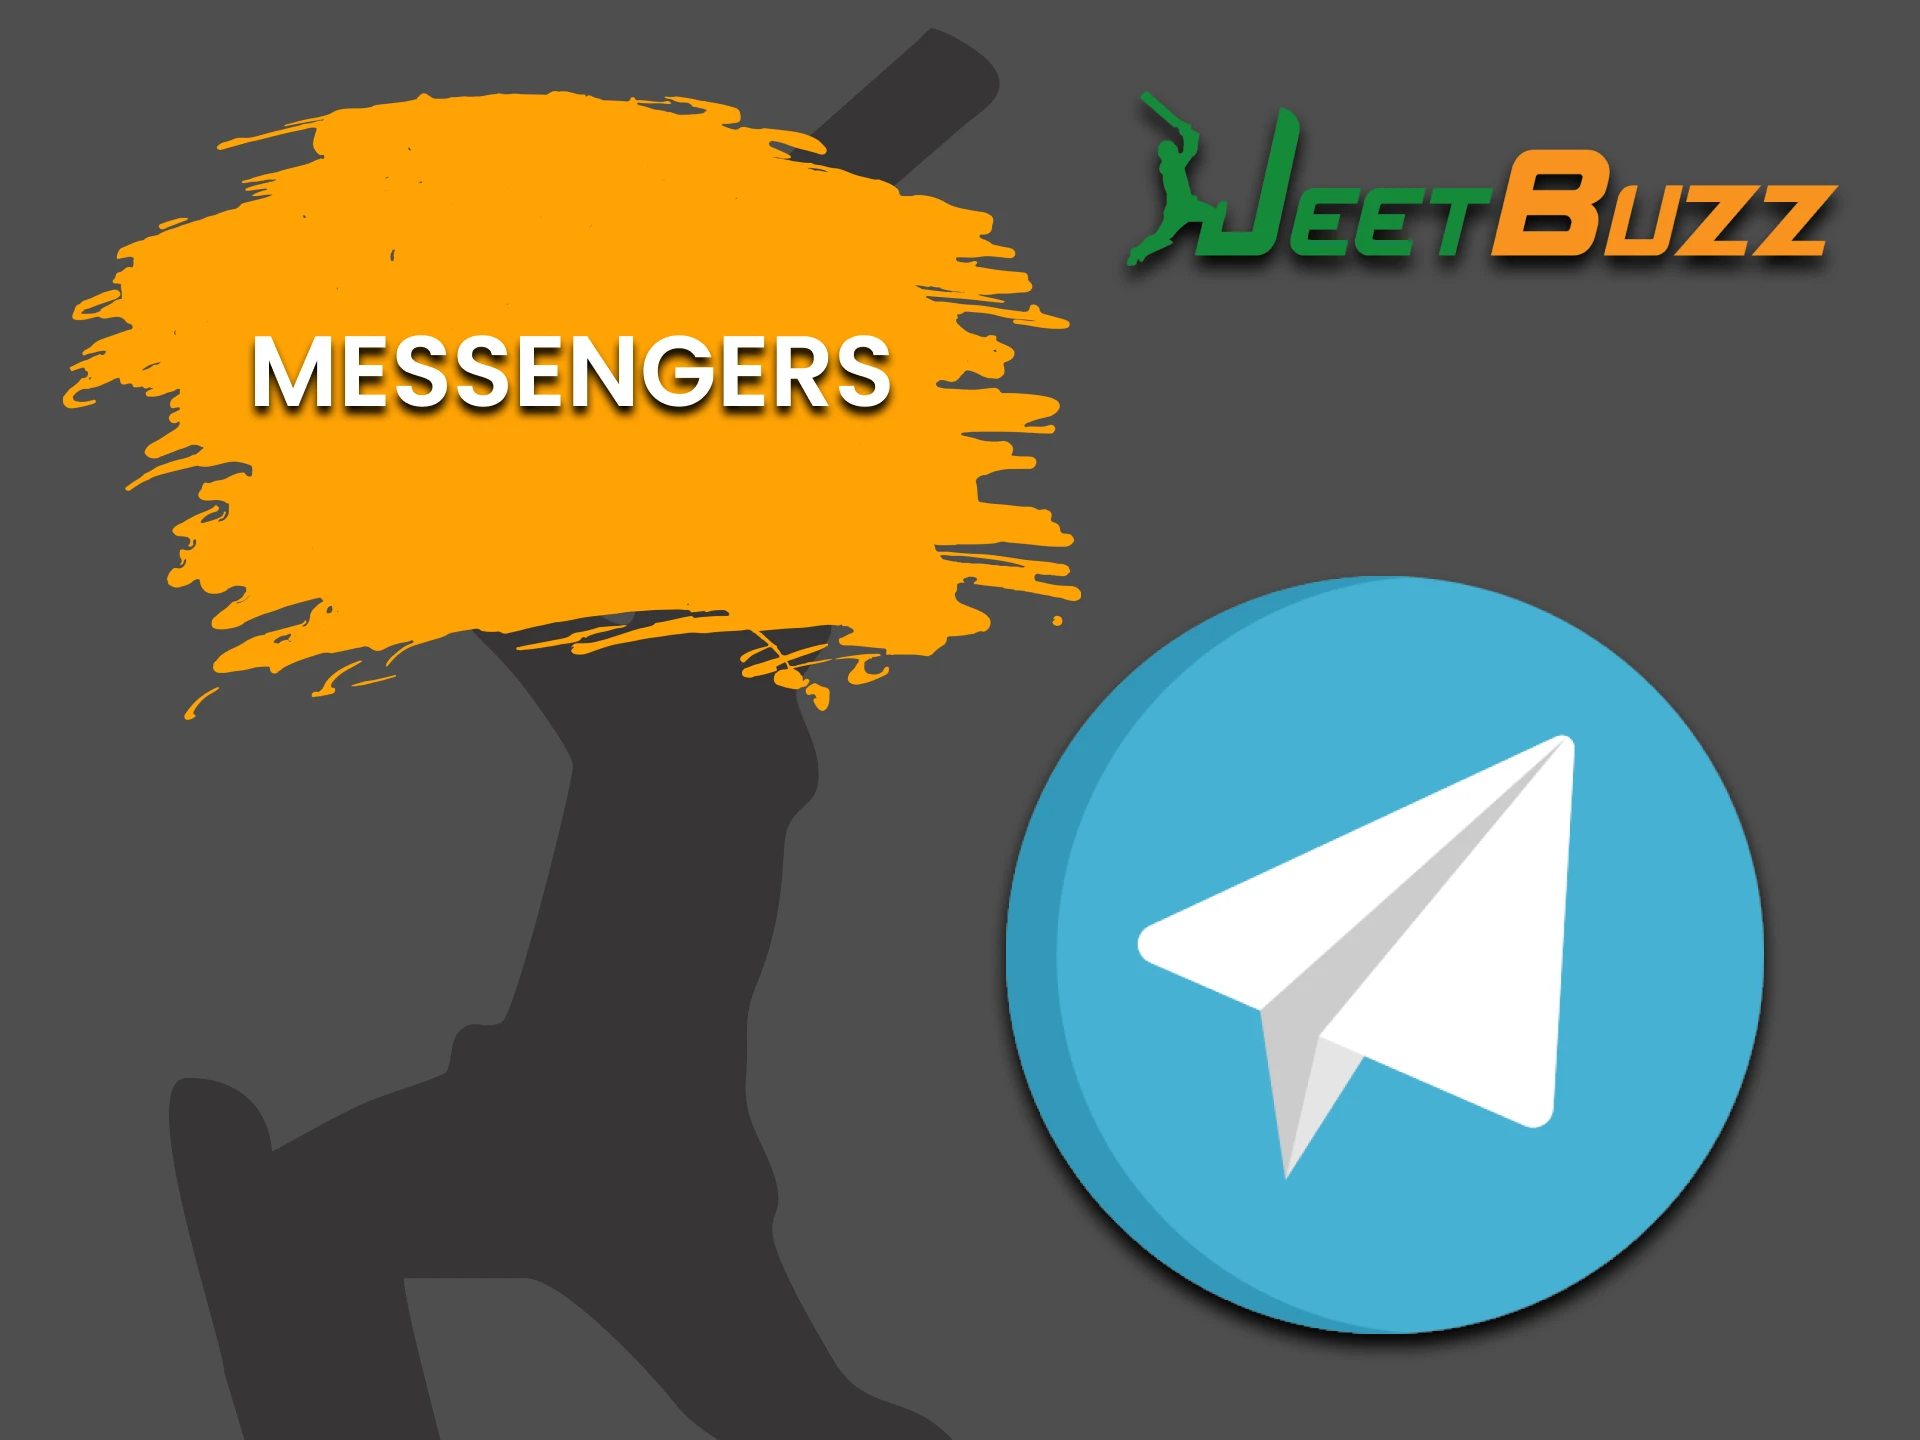 You can contact the JeetBuzz team through instant messengers.